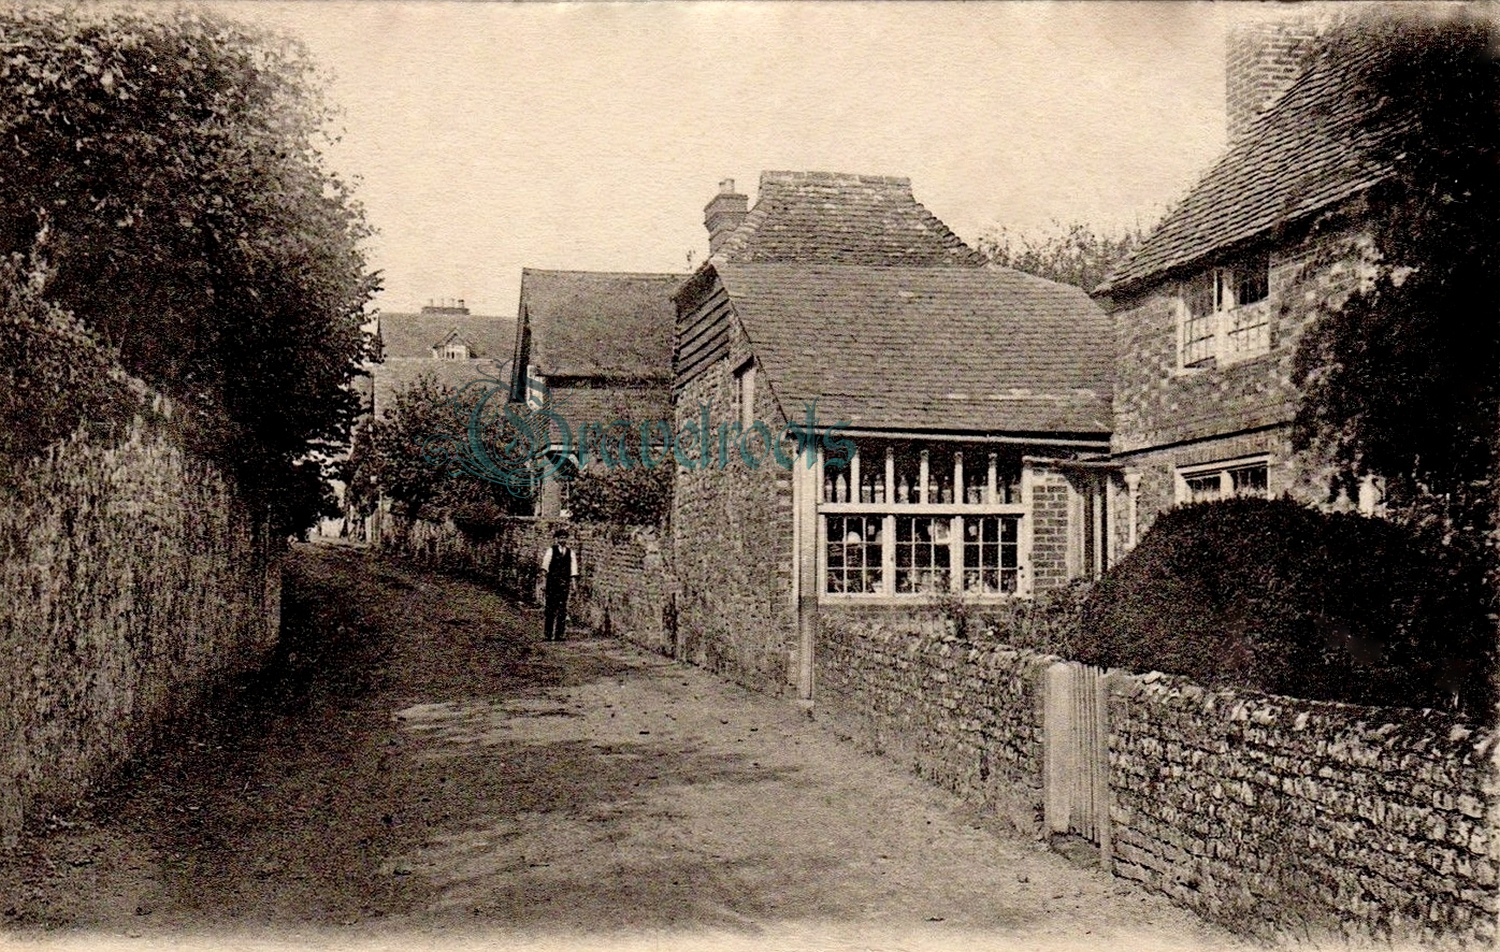  old photos of Lodsworth, Sussex - click image below to return